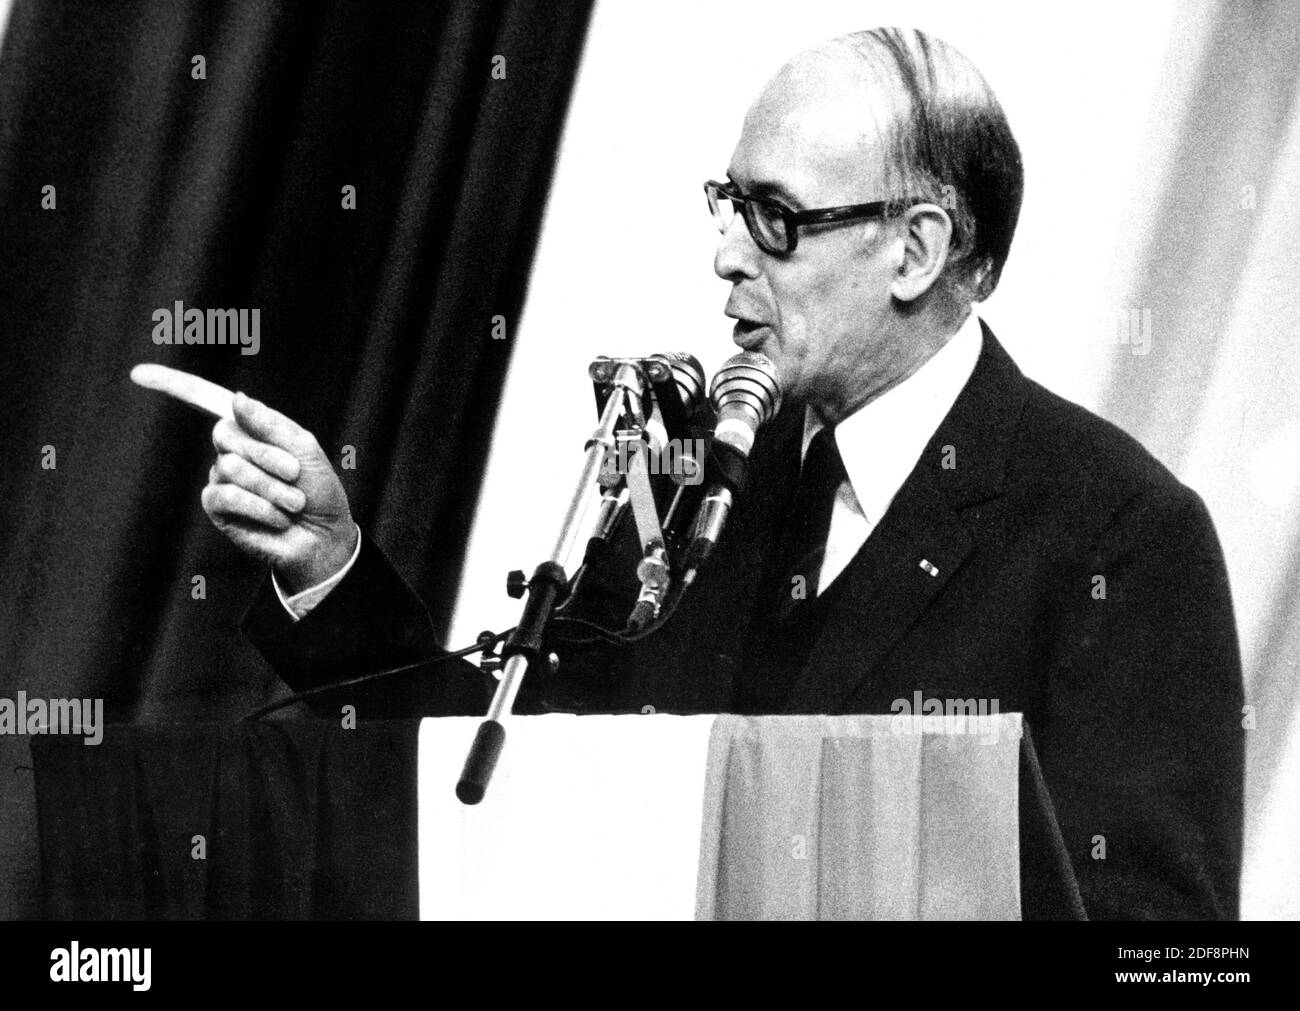 AJAXNETPHOTO. 3RD MAY, 1981. PARIS, FRANCE. - PRESIDENTIAL HOPEFUL - VALÉRY GISCARD D'ESTAING WHO DIED 02 DECEMBER, 2020, GIVES SPEACH TO SUPPORTERS AT A RALLY HE ATTENDED.PHOTO:JONATHAN EASTLAND/AJAX REF:810305 1 2 Stock Photo